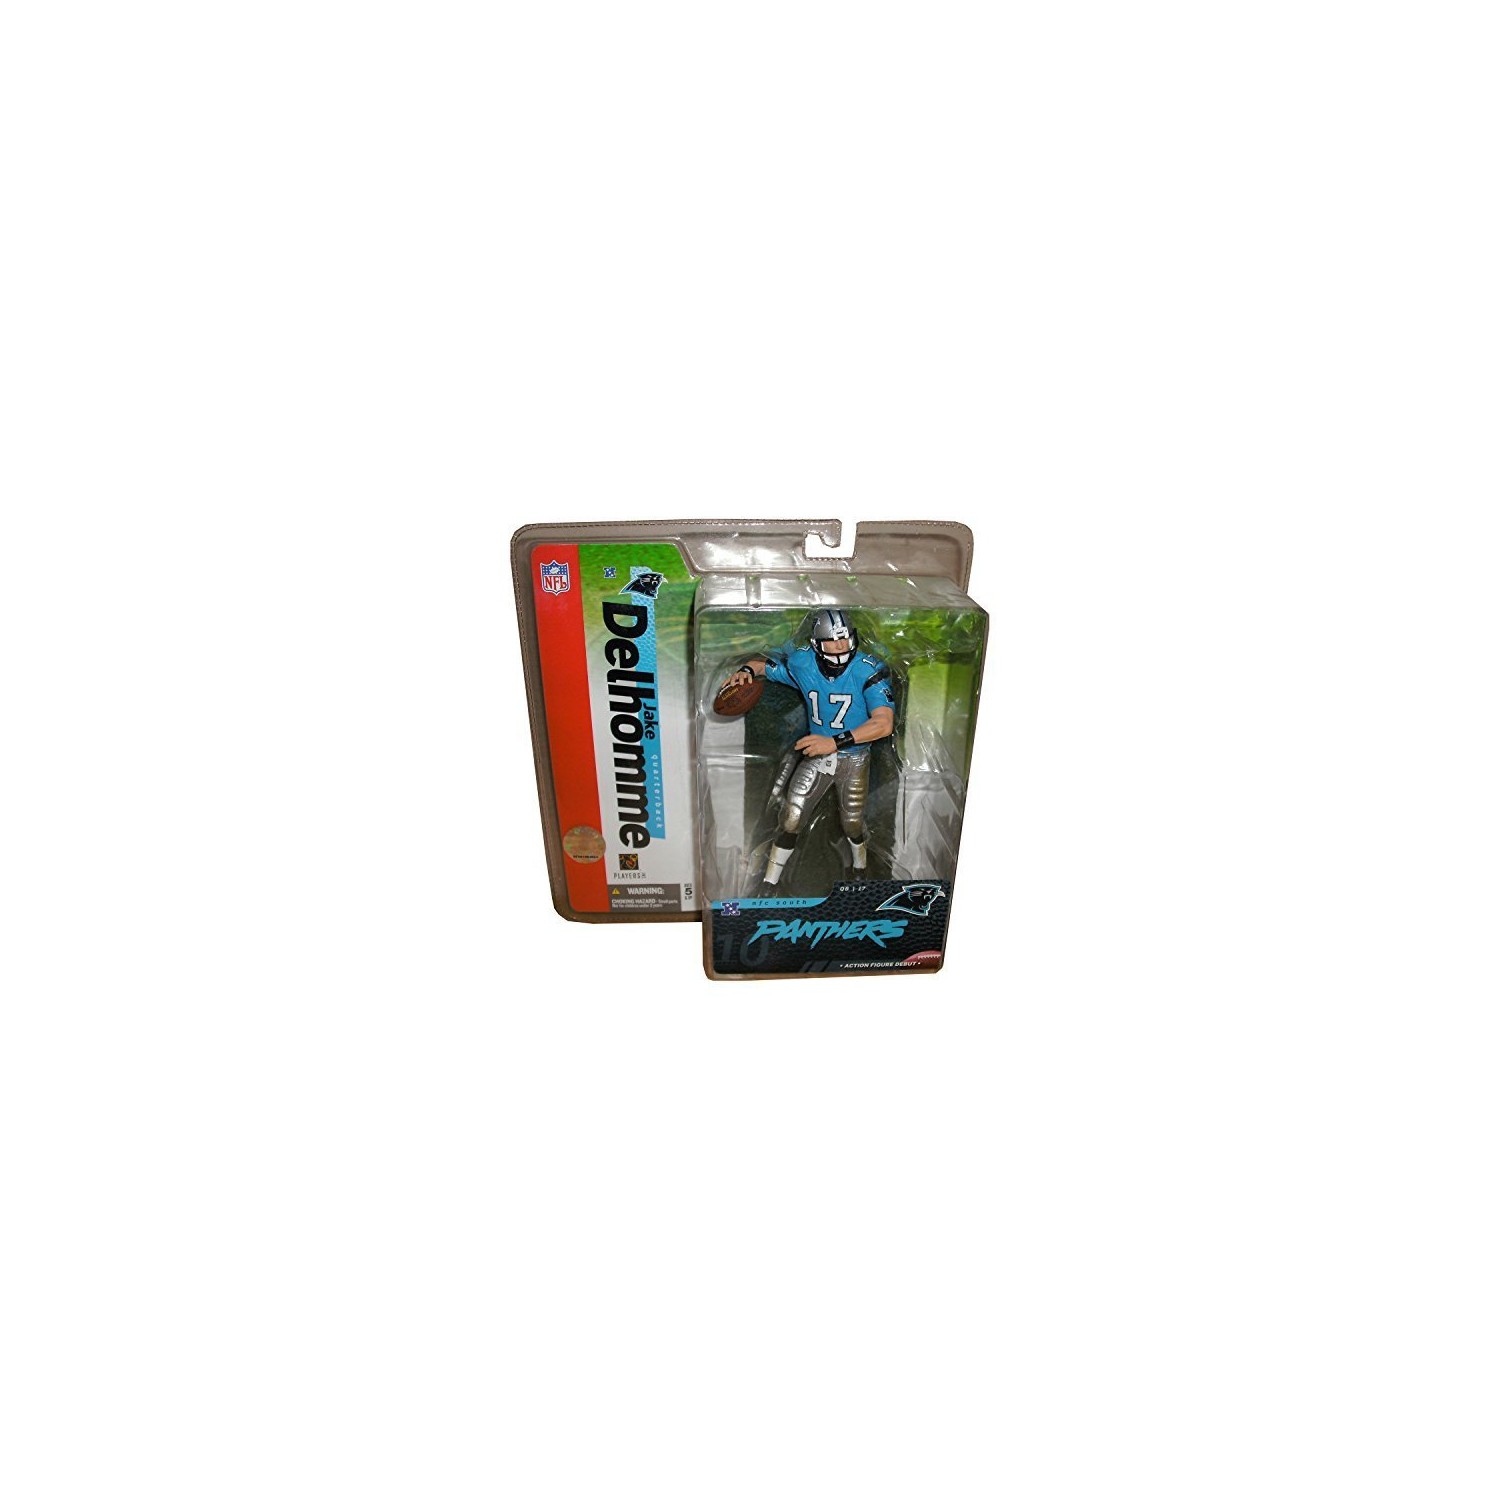 Jake Delhomme 17 Carolina Panthers Blue Jersey Silver Pants Variant Chase Alternate McFarlane NFL Series Action Figure by Unk